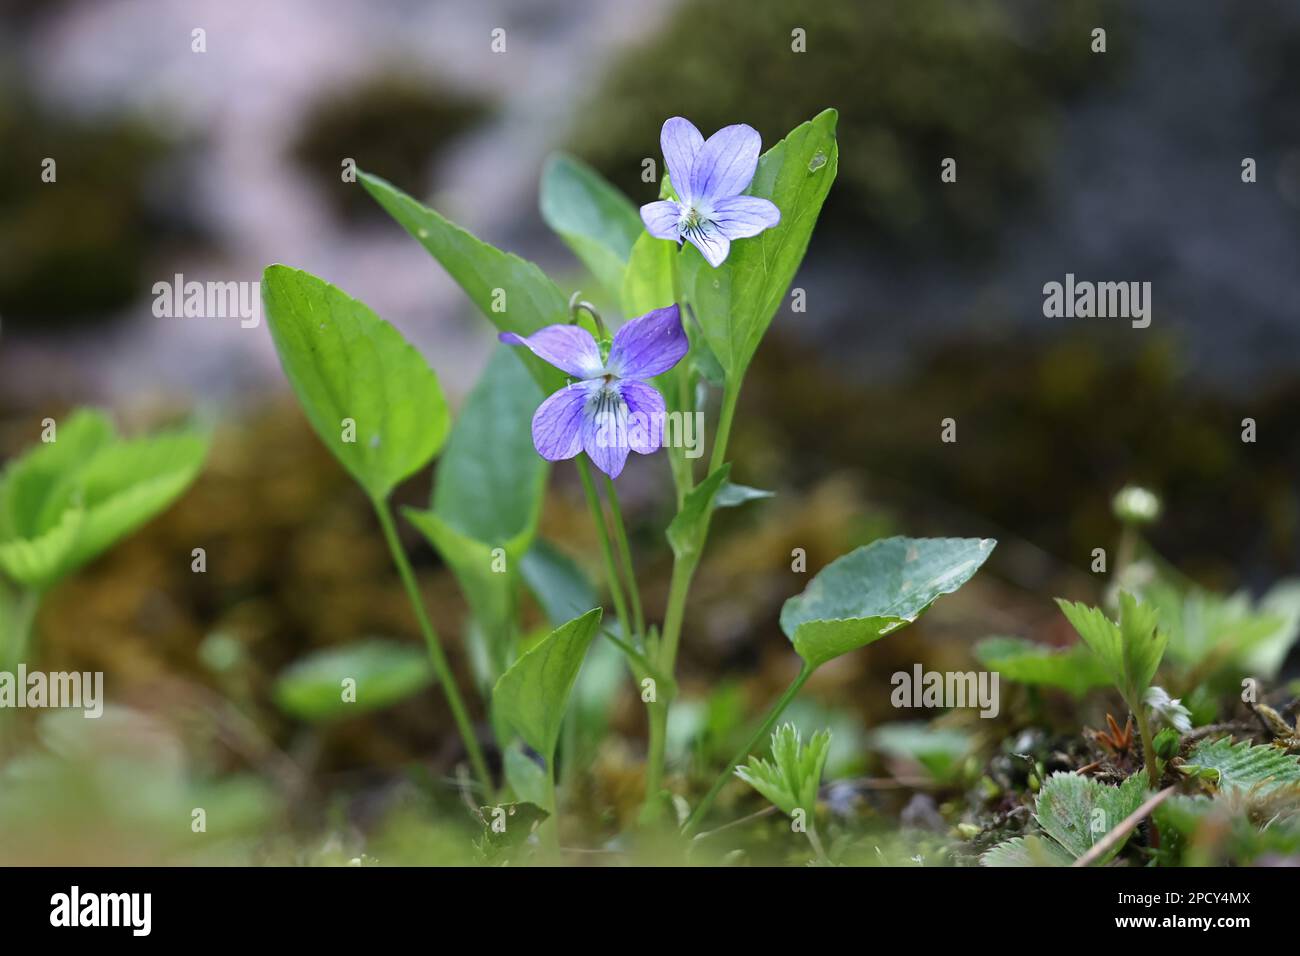 Viola canina, commonly known as Heath Dog Violet or Heath Violet, wild flowering plant from Finland Stock Photo